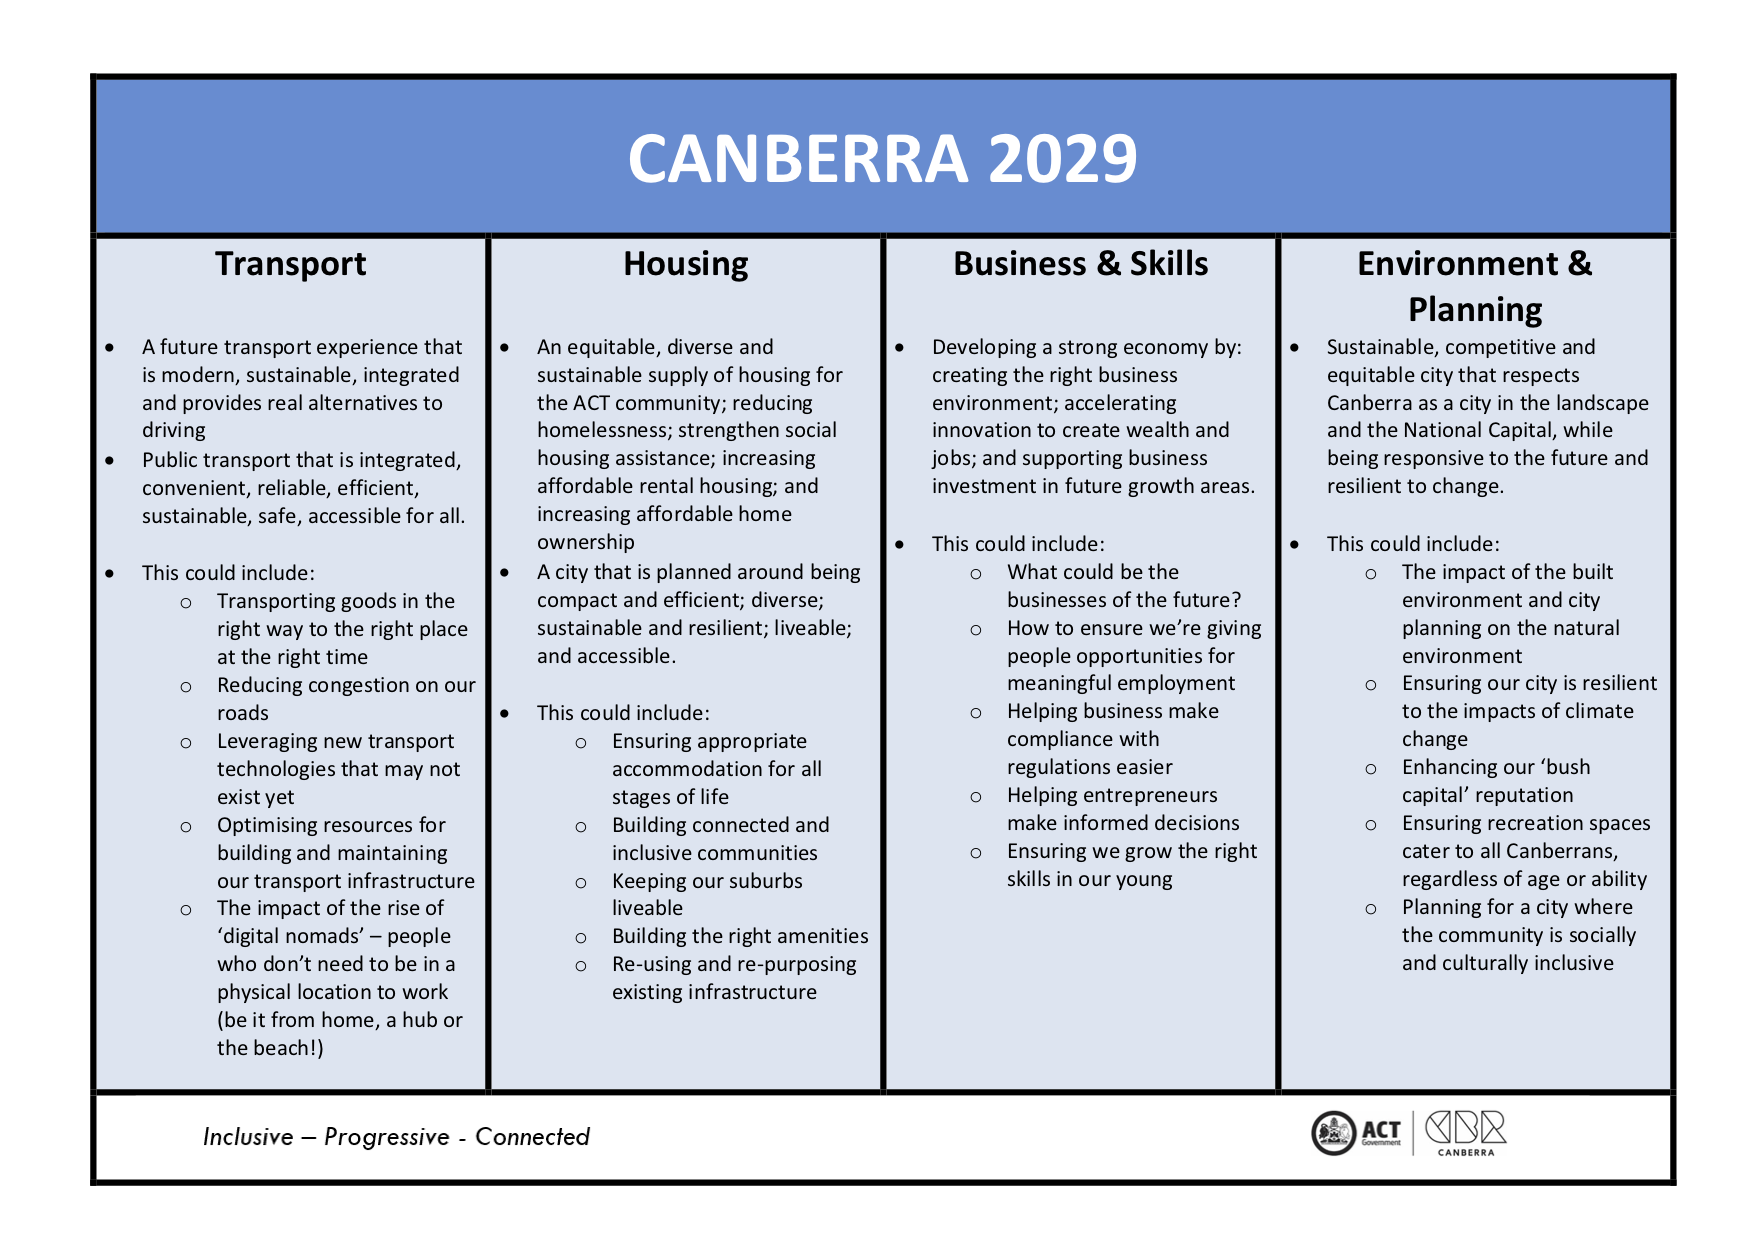 Canberra 2029 – First Hackers: Inclusive; Progressive; Connected pdf_preview